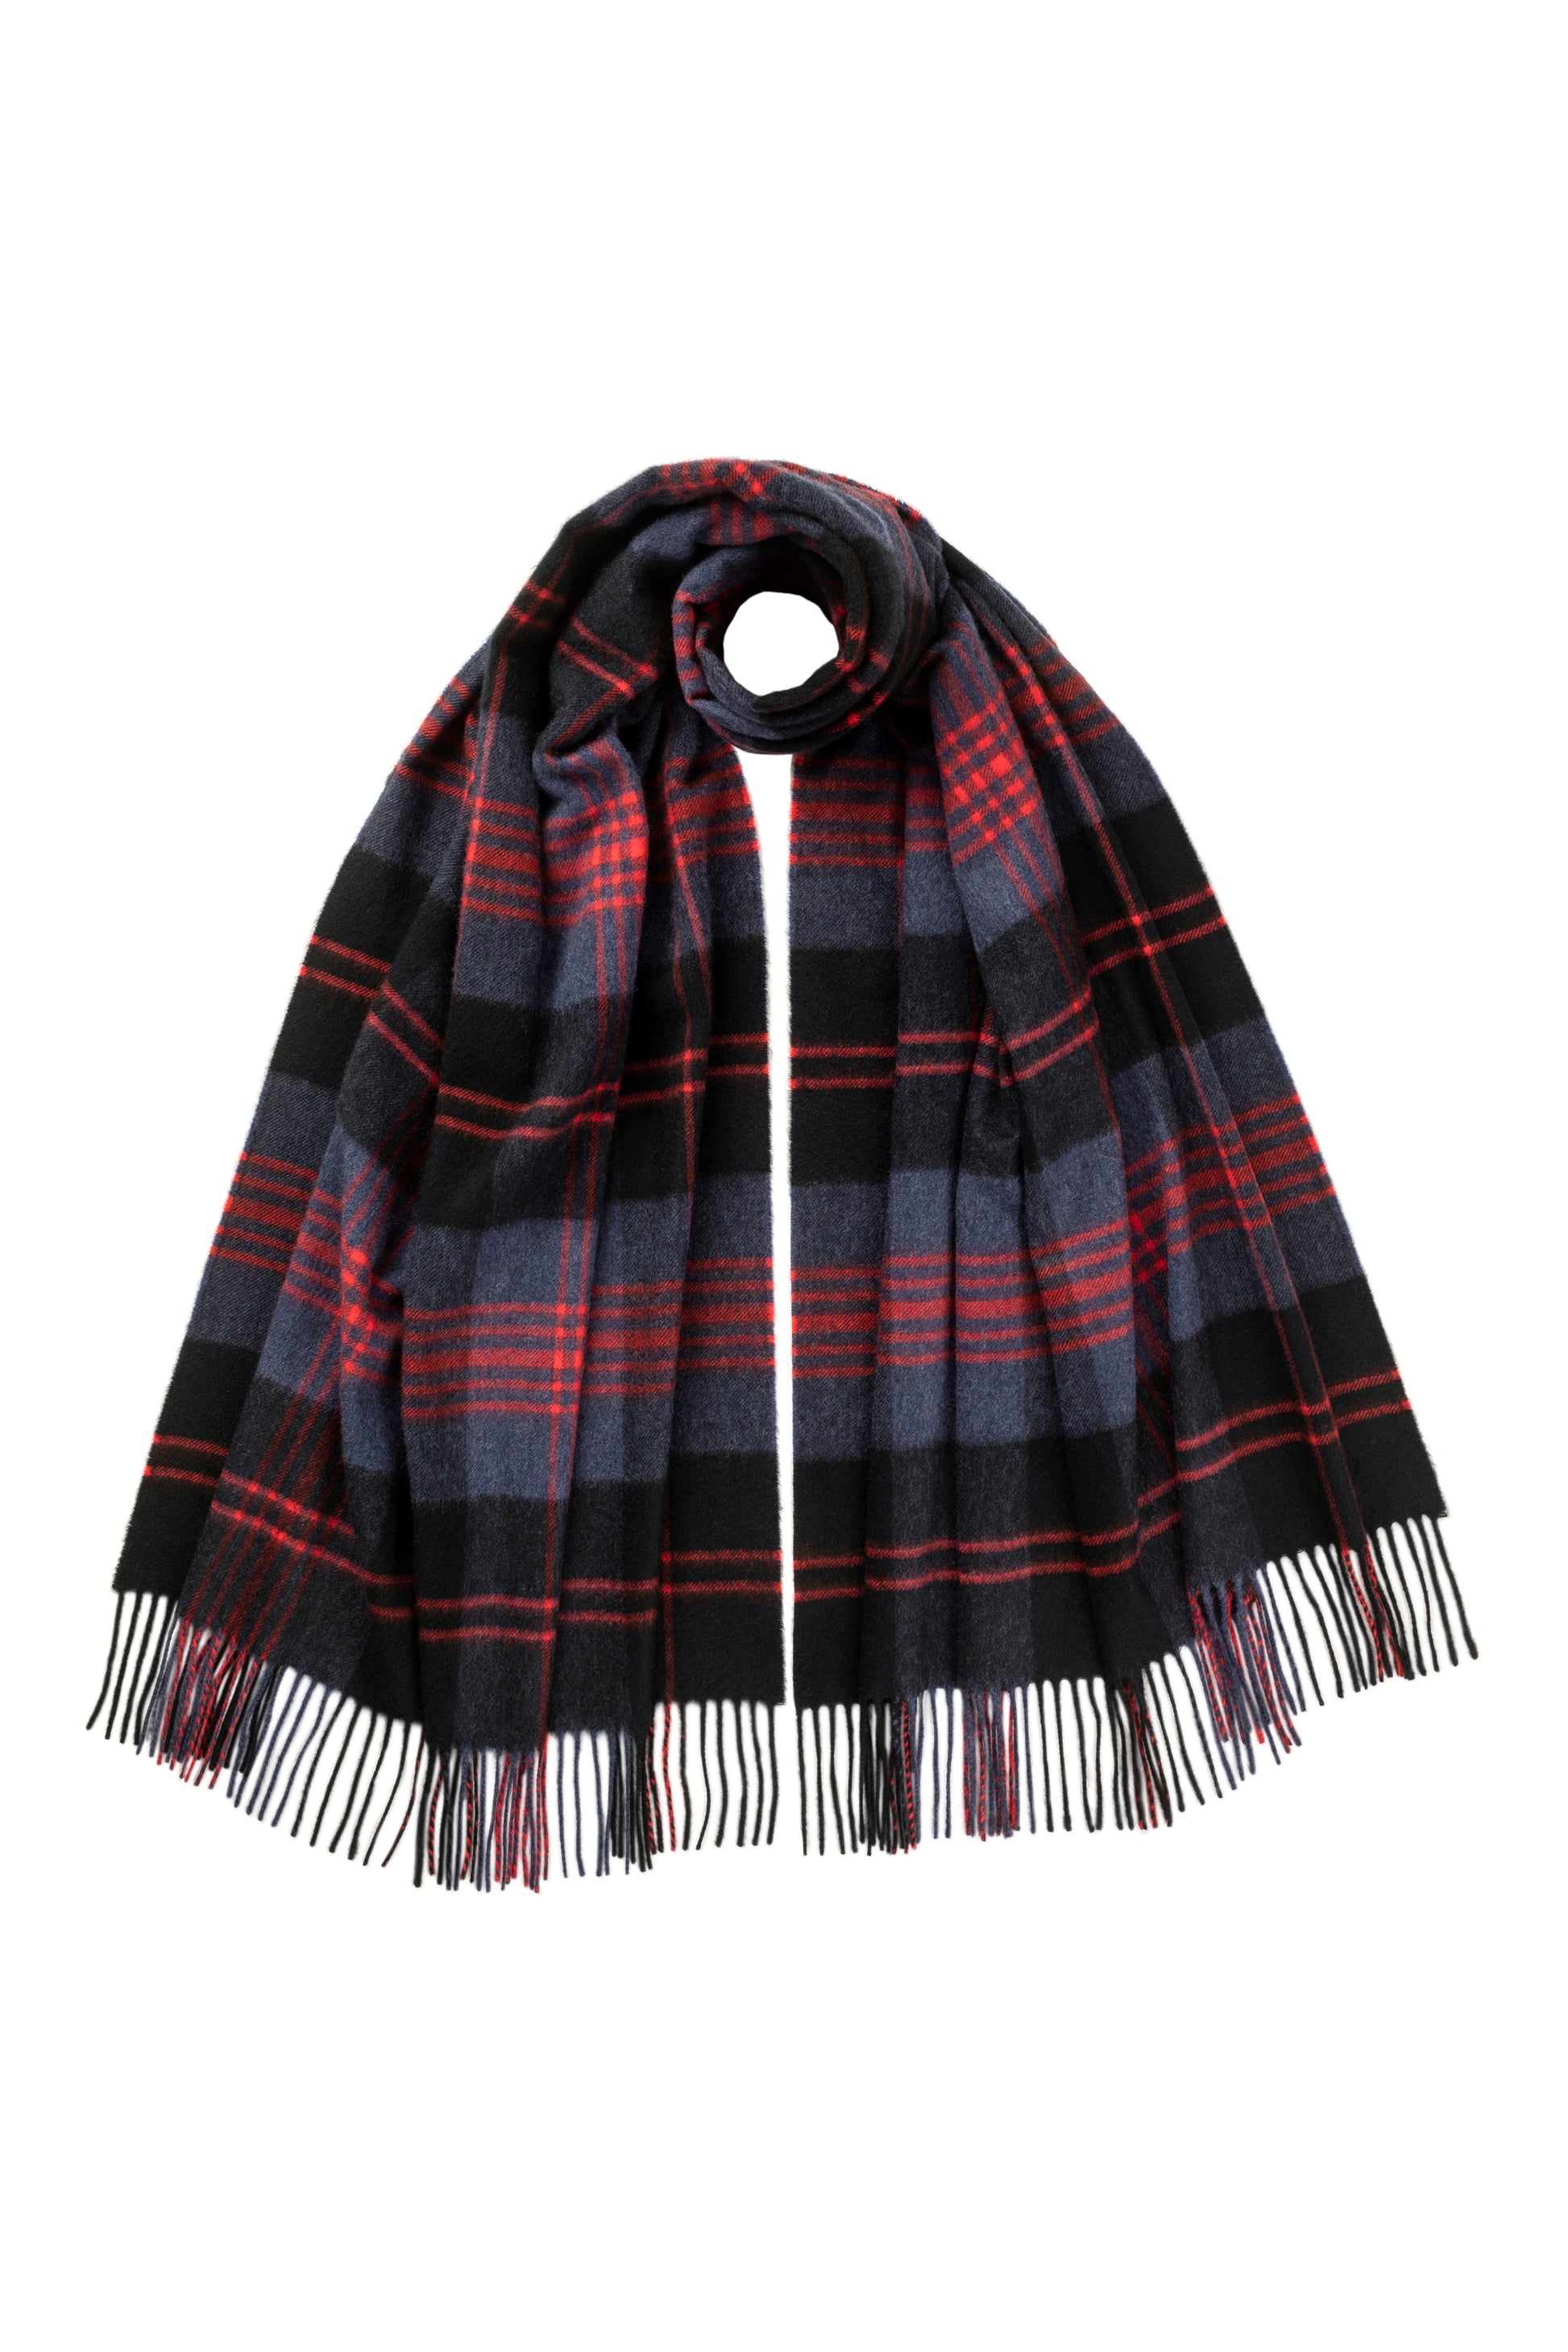 Johnstons of Elgin Tartan Cashmere Stole in Angus on a white background WA000056KU0125ONE